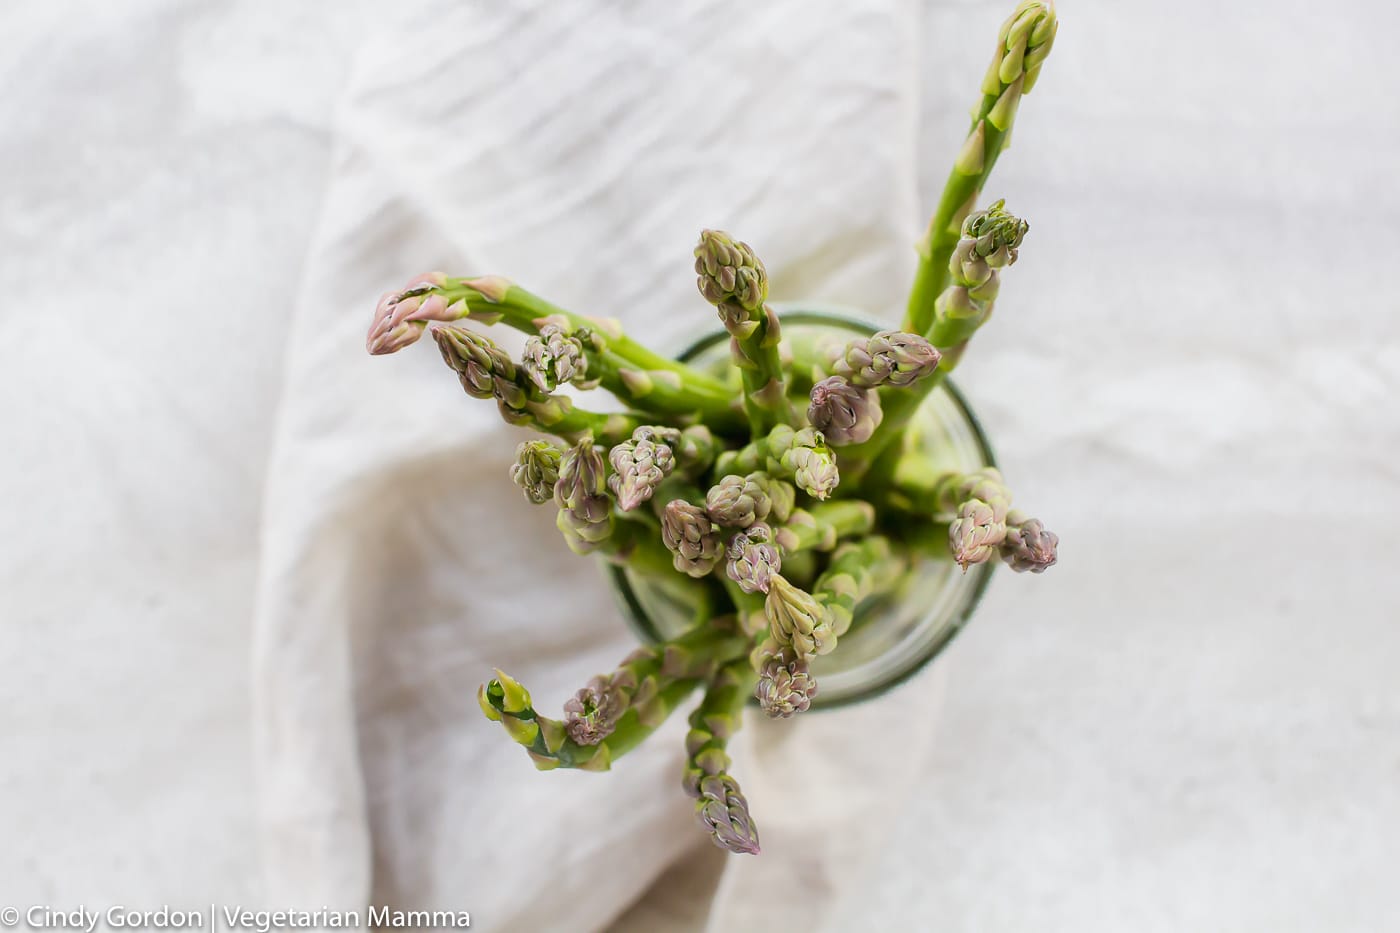 stalks of fresh asparagus in a cup